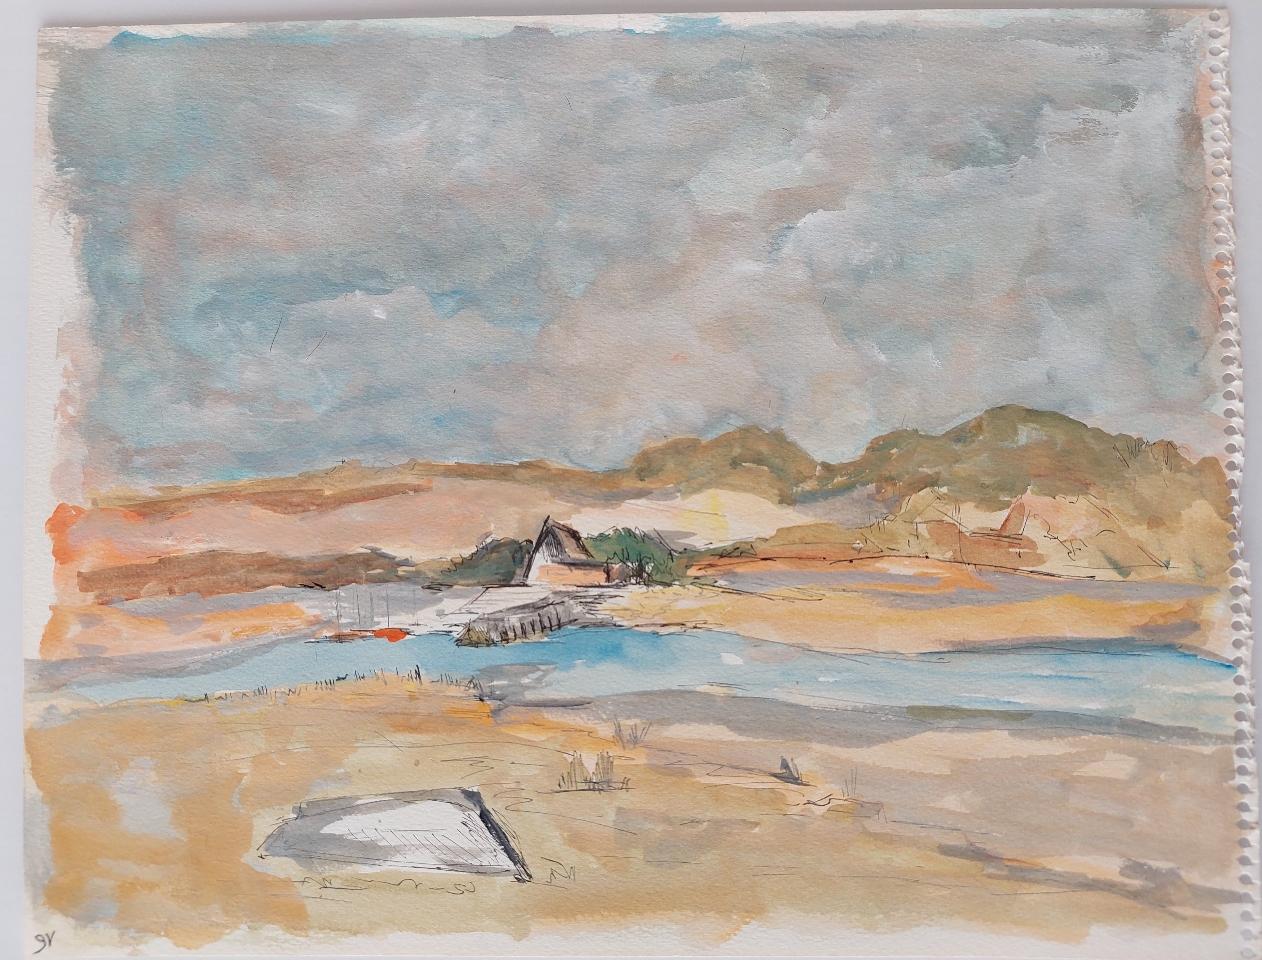 Coastal Summer landscape
by Bernard Labbe (French mid 20th century)
original watercolor and gouache on paper
size: 13.5 x 10.5 inches
unsigned, stamped verso
condition: very good and ready to be enjoyed

provenance: the artists atelier/